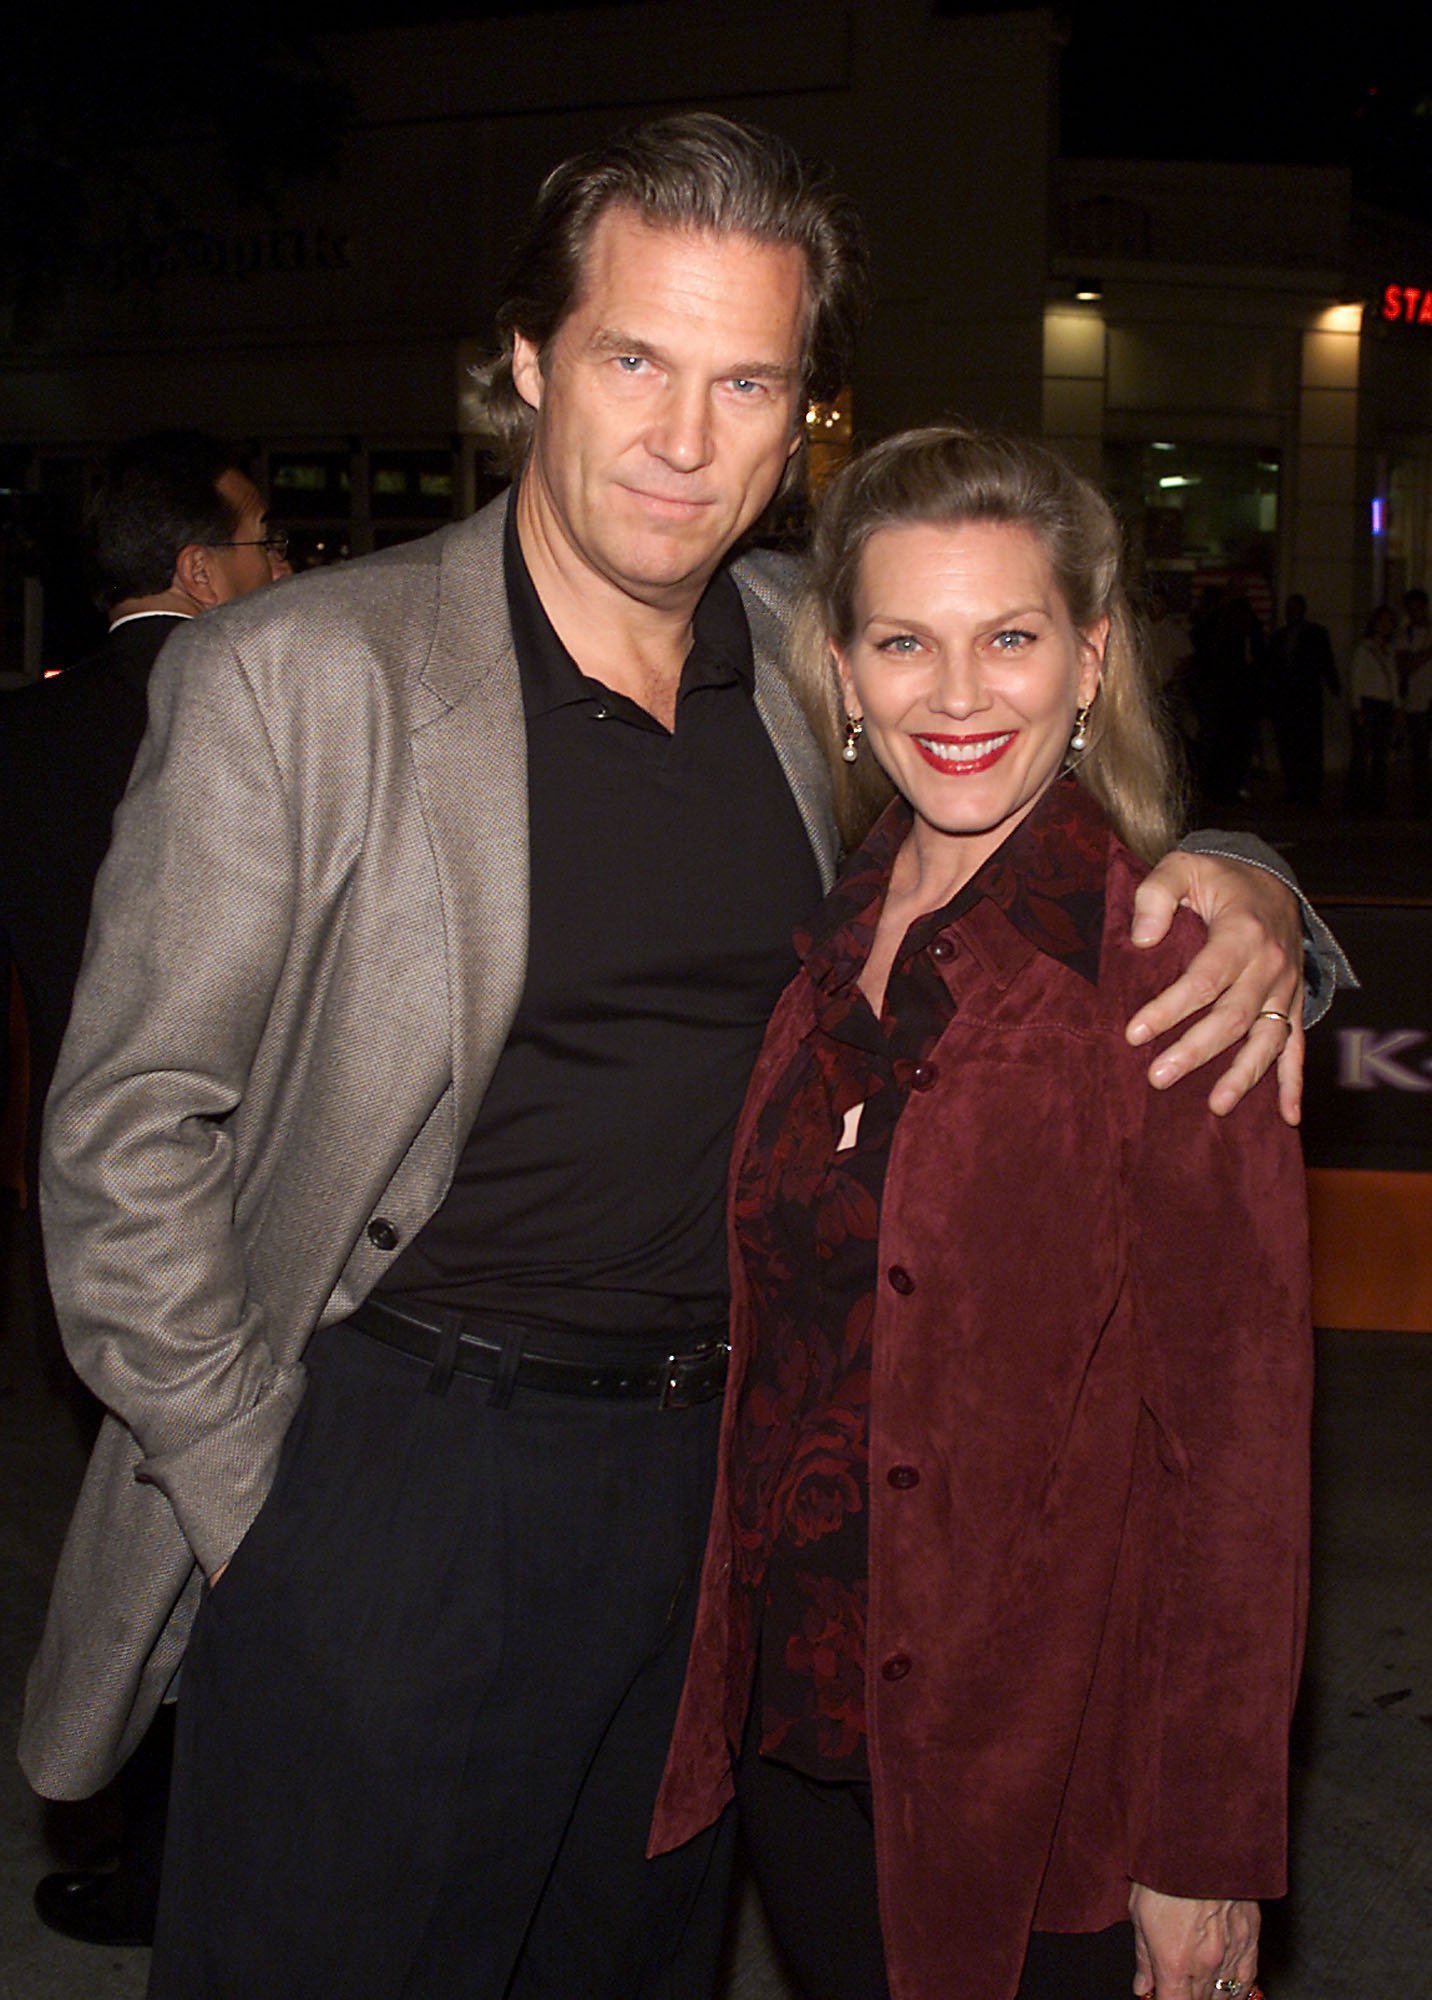 Jeff and Susan Bridges at the premiere of "K-Pax" at the Village Theater in Los Angeles on October 22, 2001. | Source: Getty Images